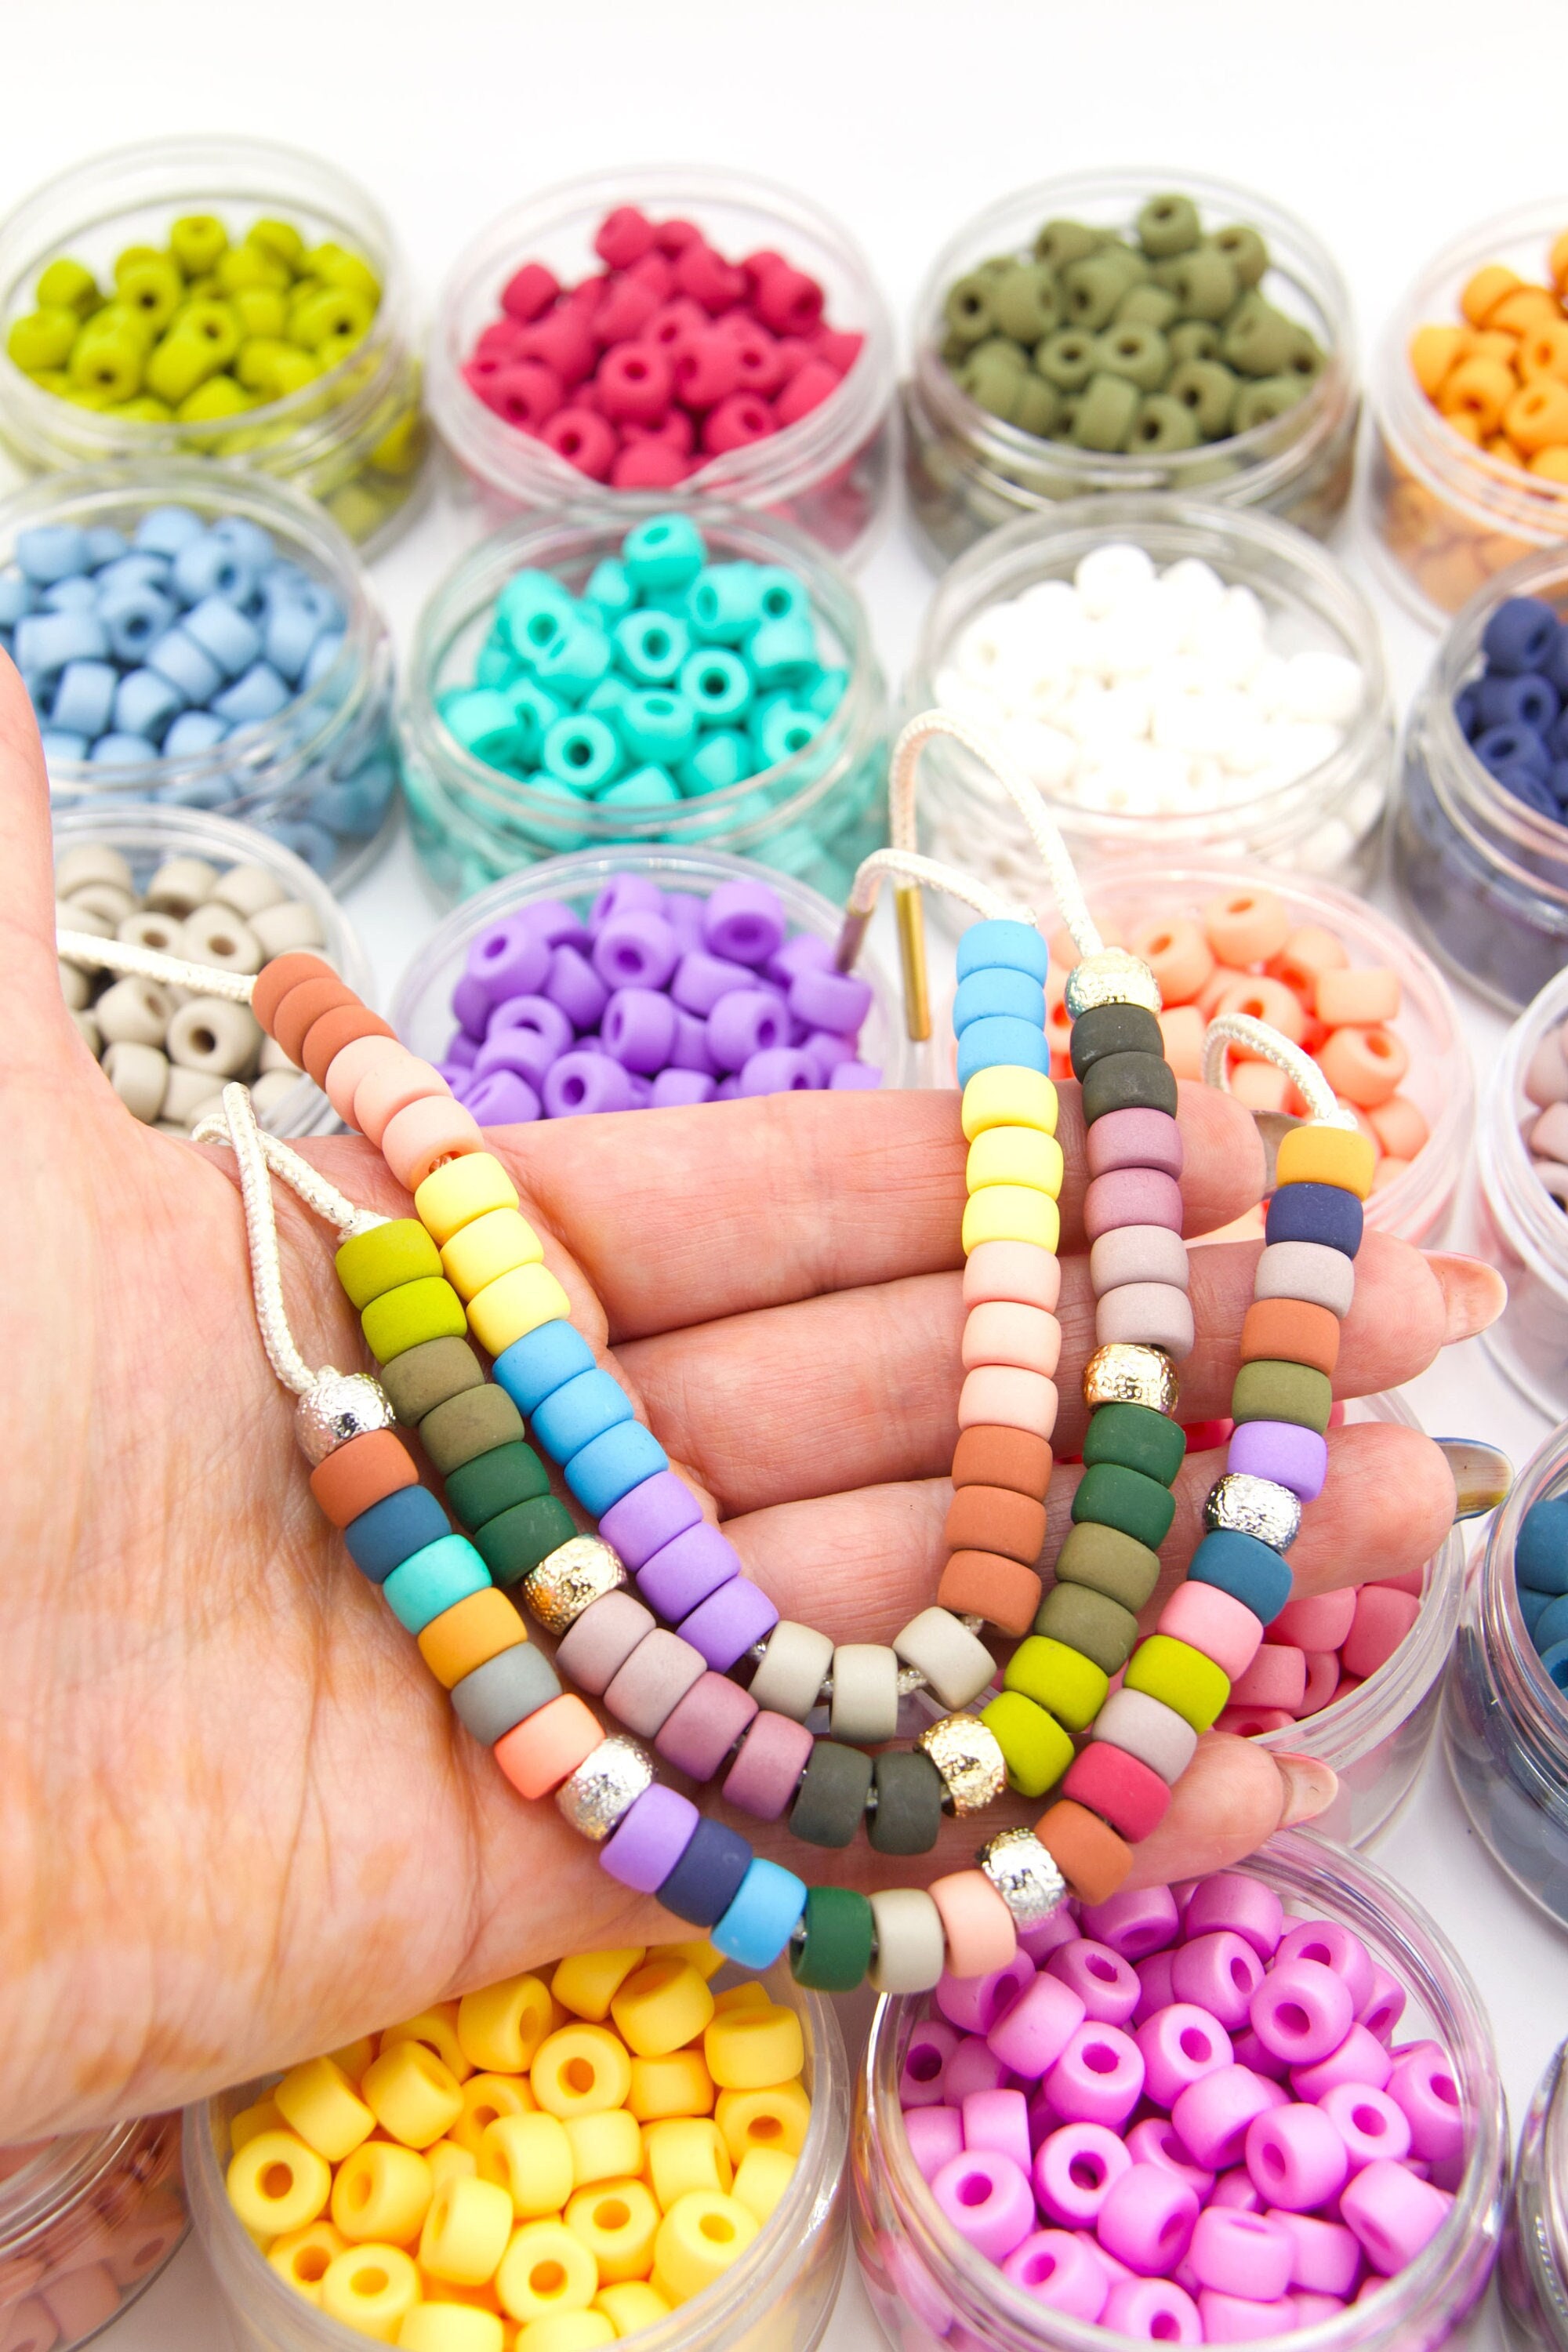 3500 Pcs Rainbow Pony Beads for Jewelry Making, Hair Beads for